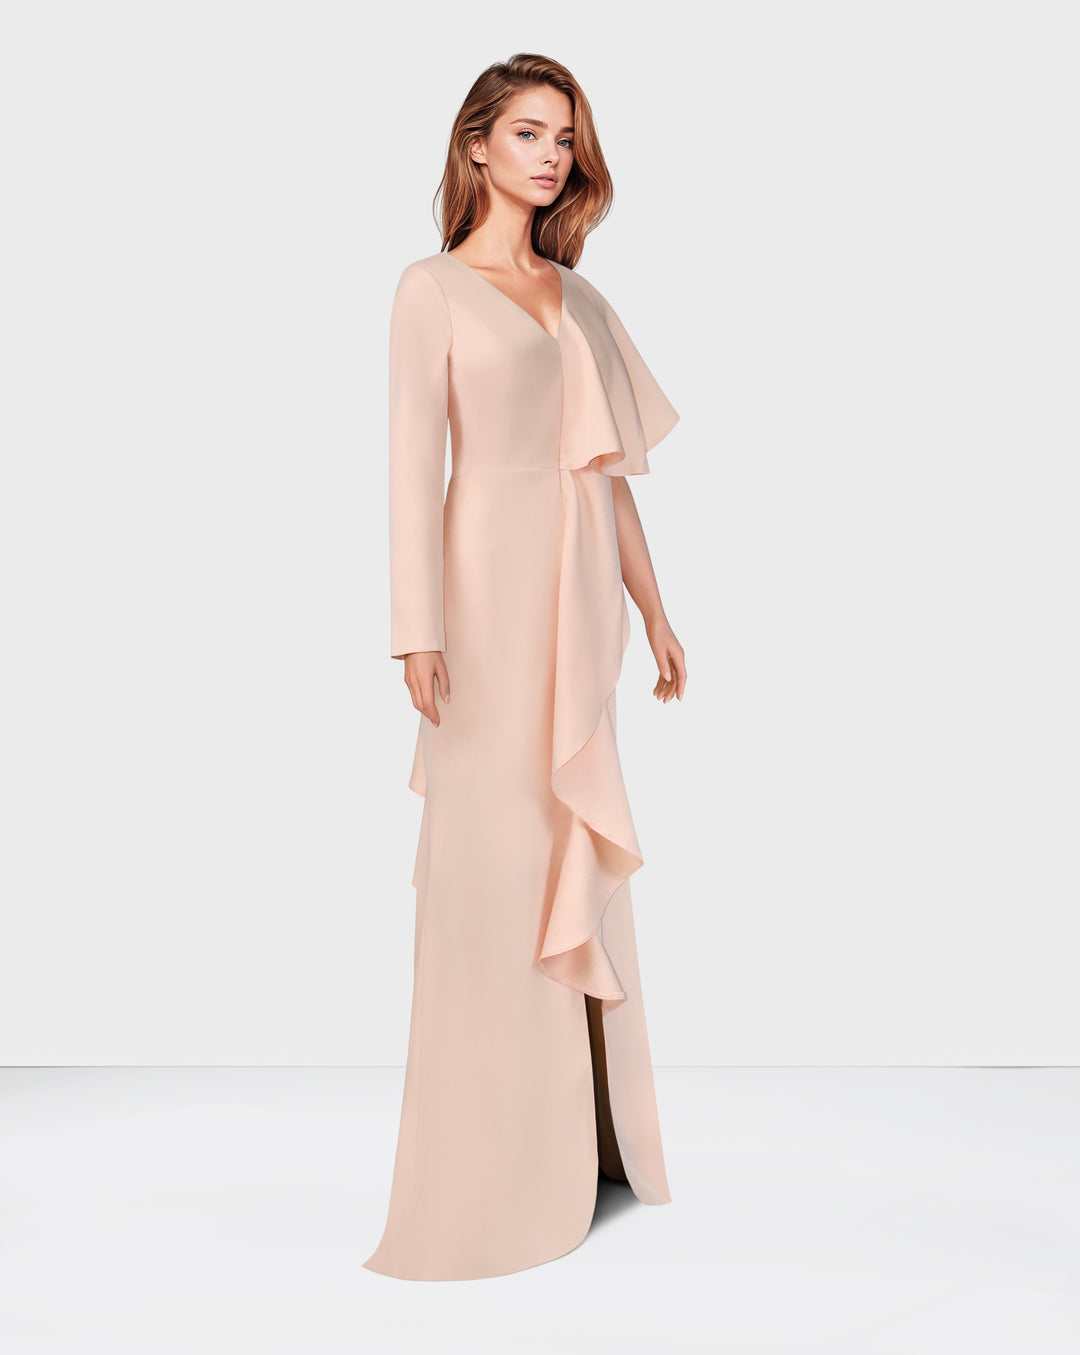 Ruffled pink dress with asymmetrical sleeves - ODD-Surinder